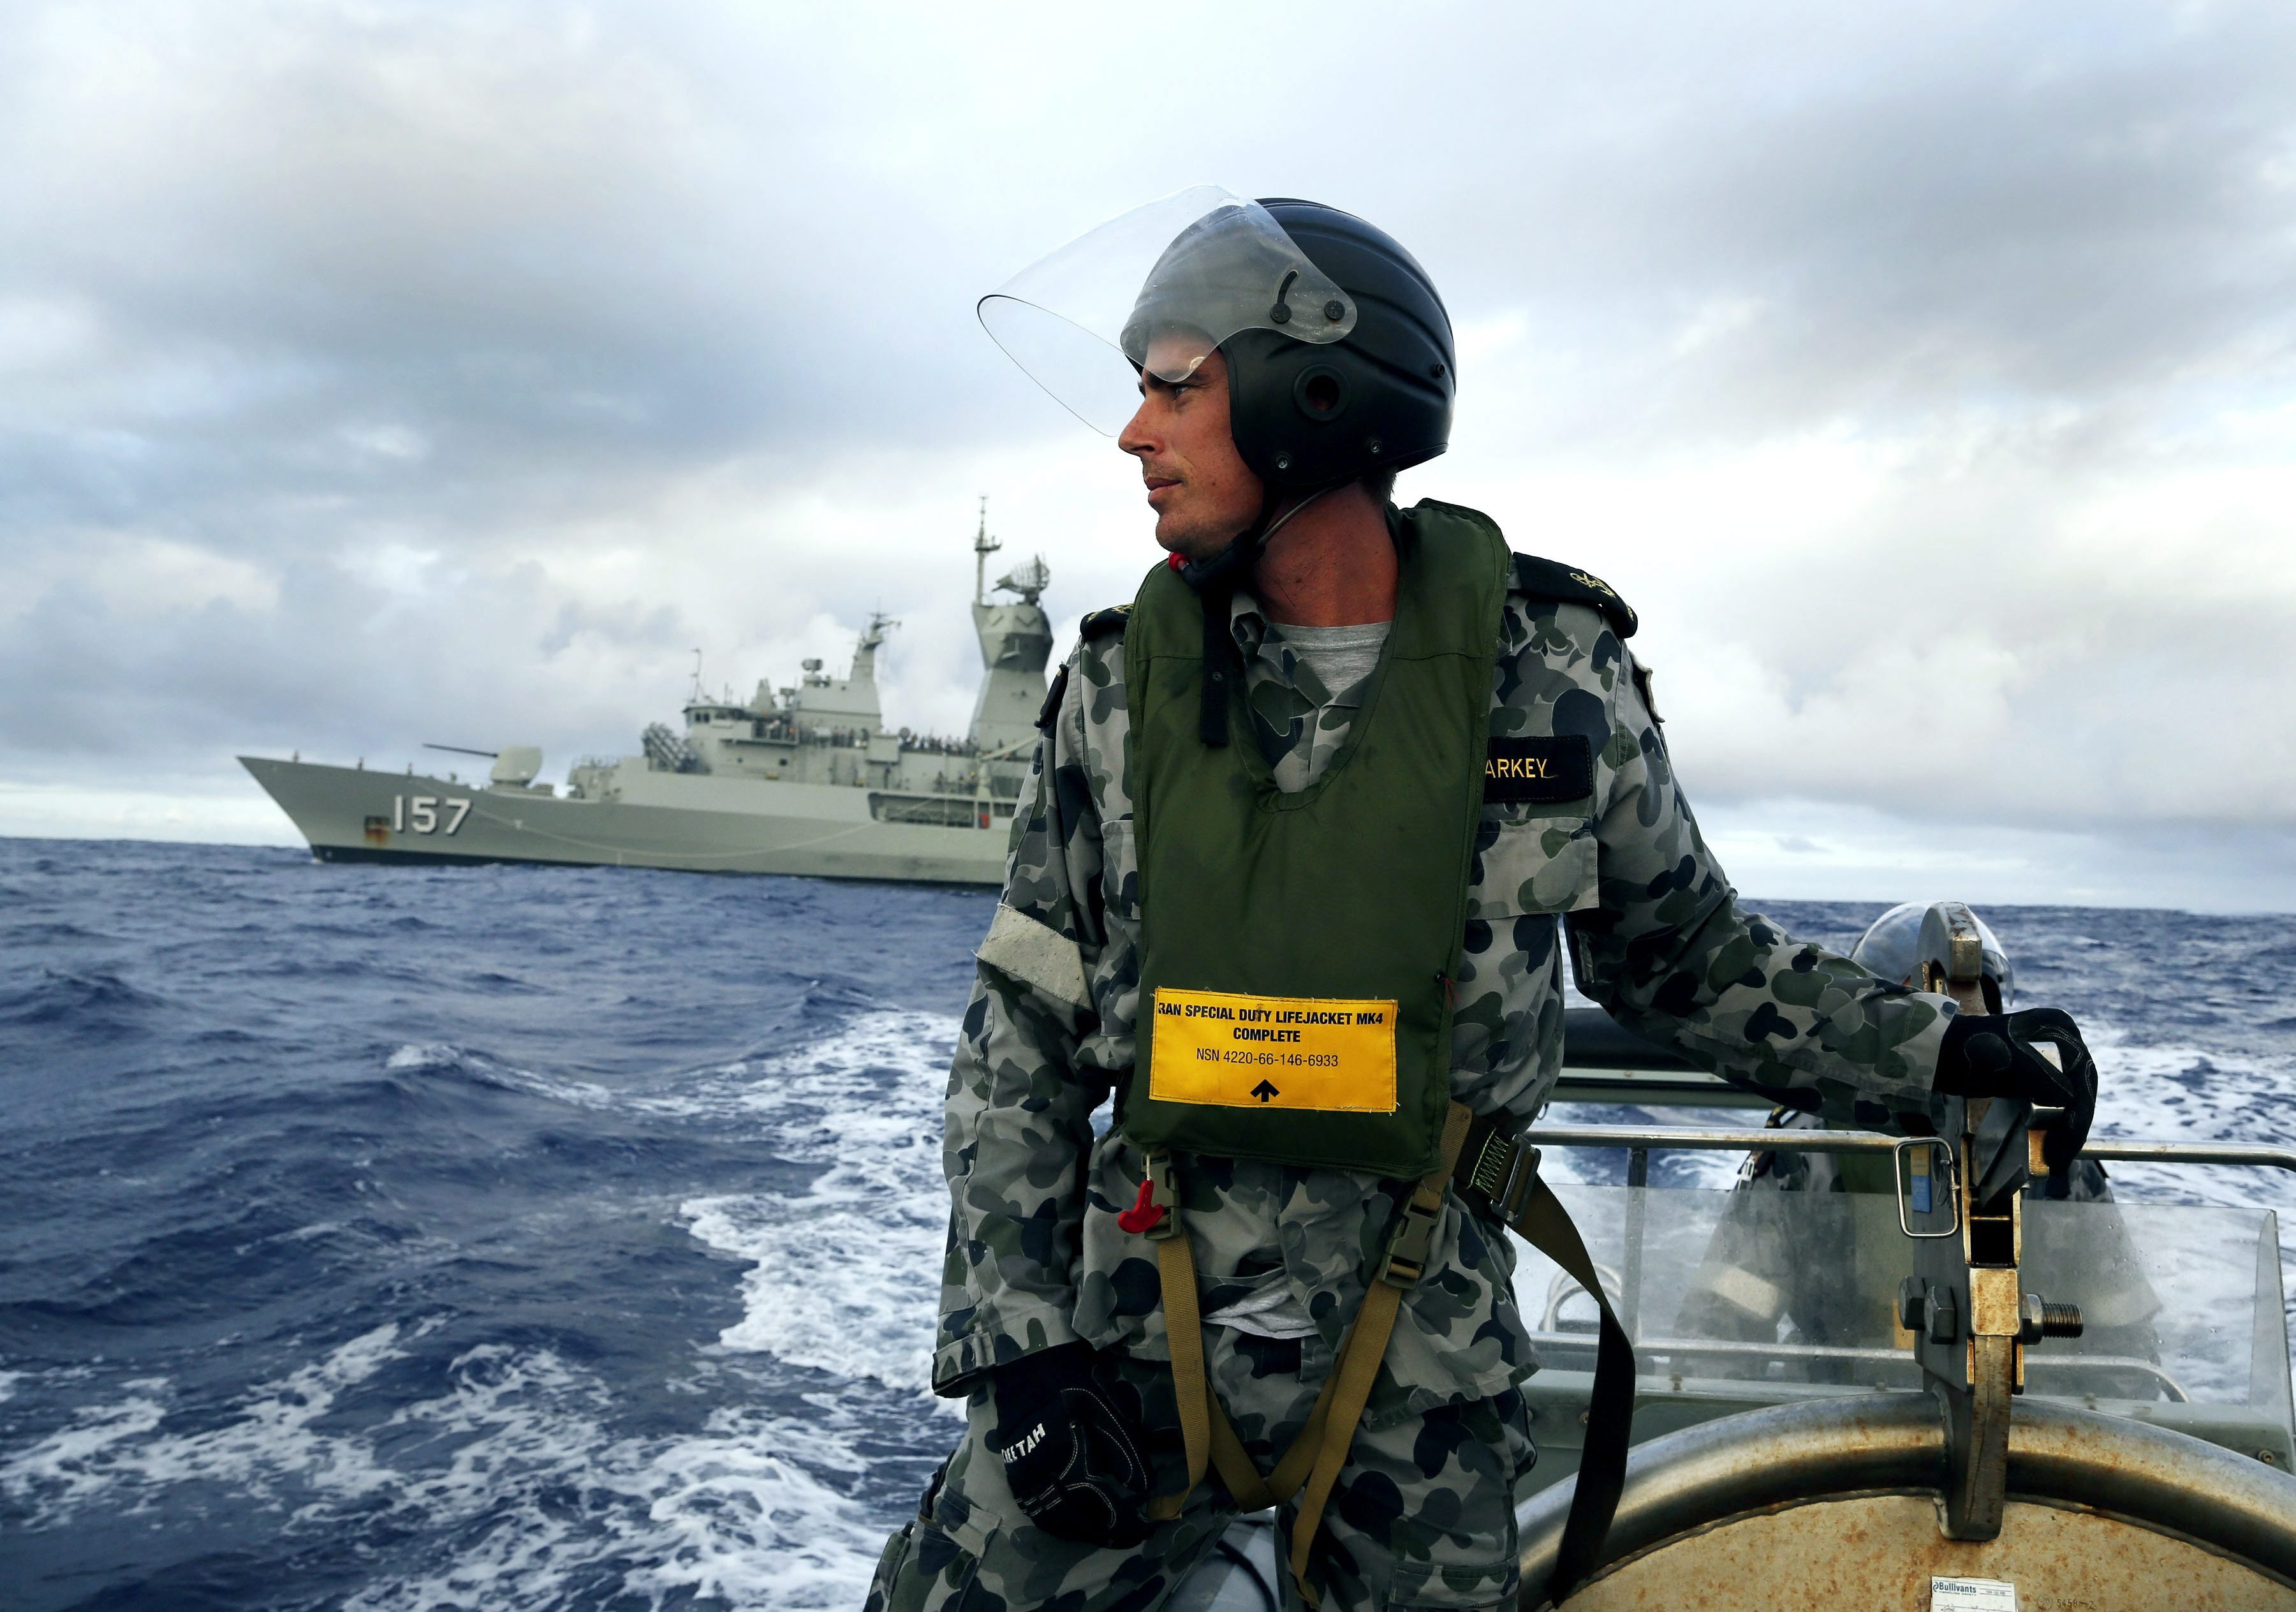 Leading Seaman, Boatswain's Mate, William Sharkey searches for debris at sea in the Southern Indian Ocean on April 6, 2014. (Australian Defence Department/EPA)